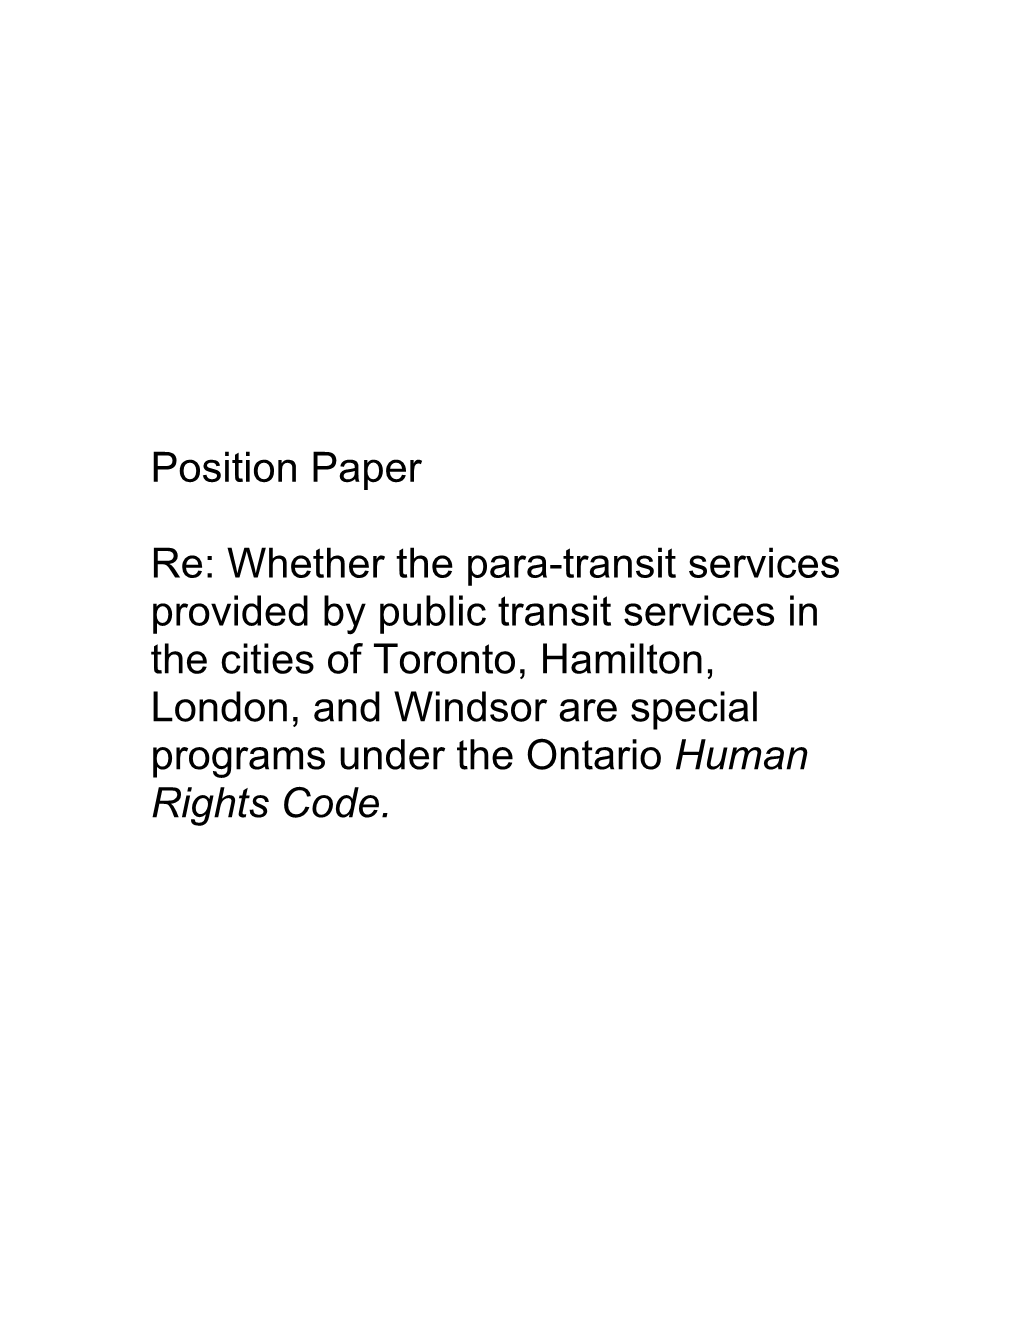 Whether the Para-Transit Services Provided by Public Transit Services